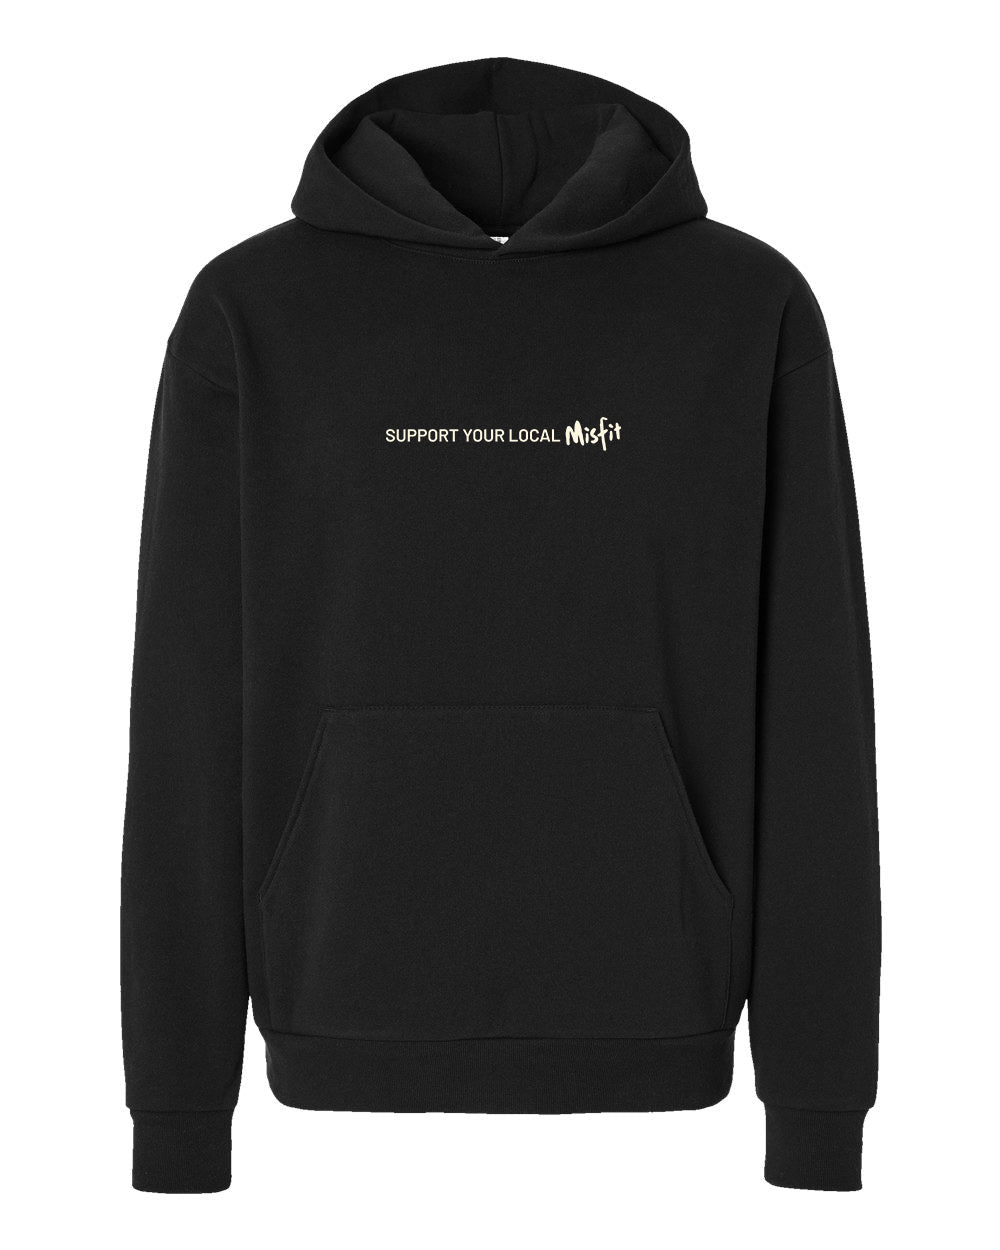 Support Your Local Misfit Unisex Hoodie by Seen Not Seen